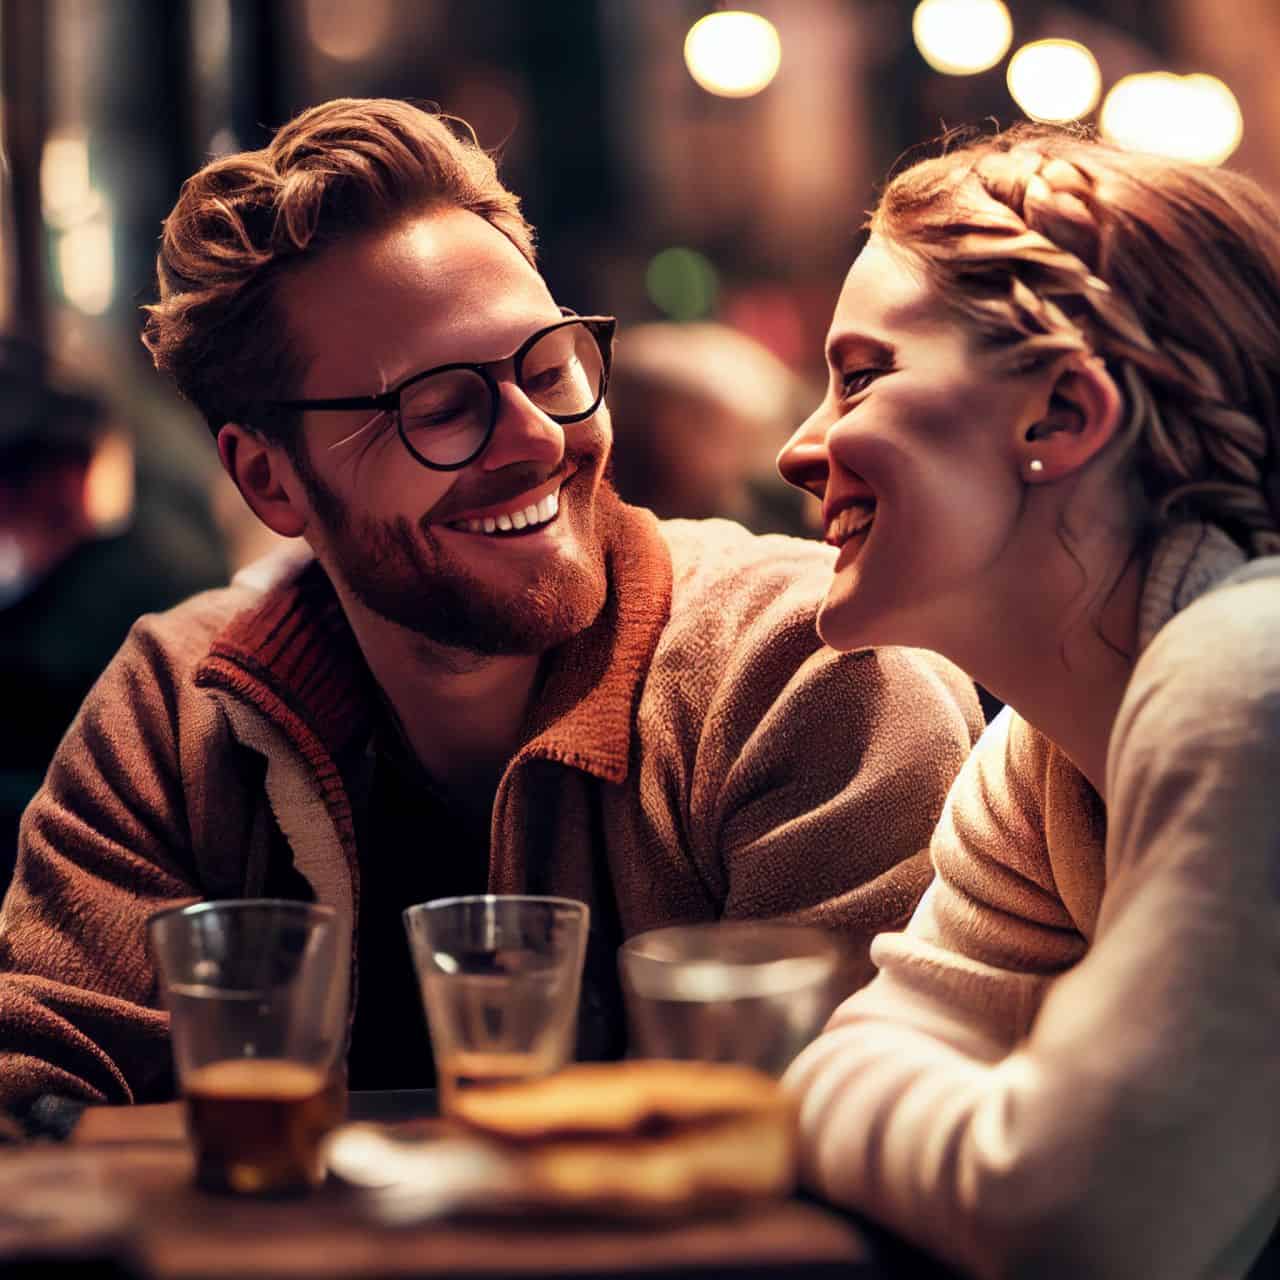 smiling bearded man on a date